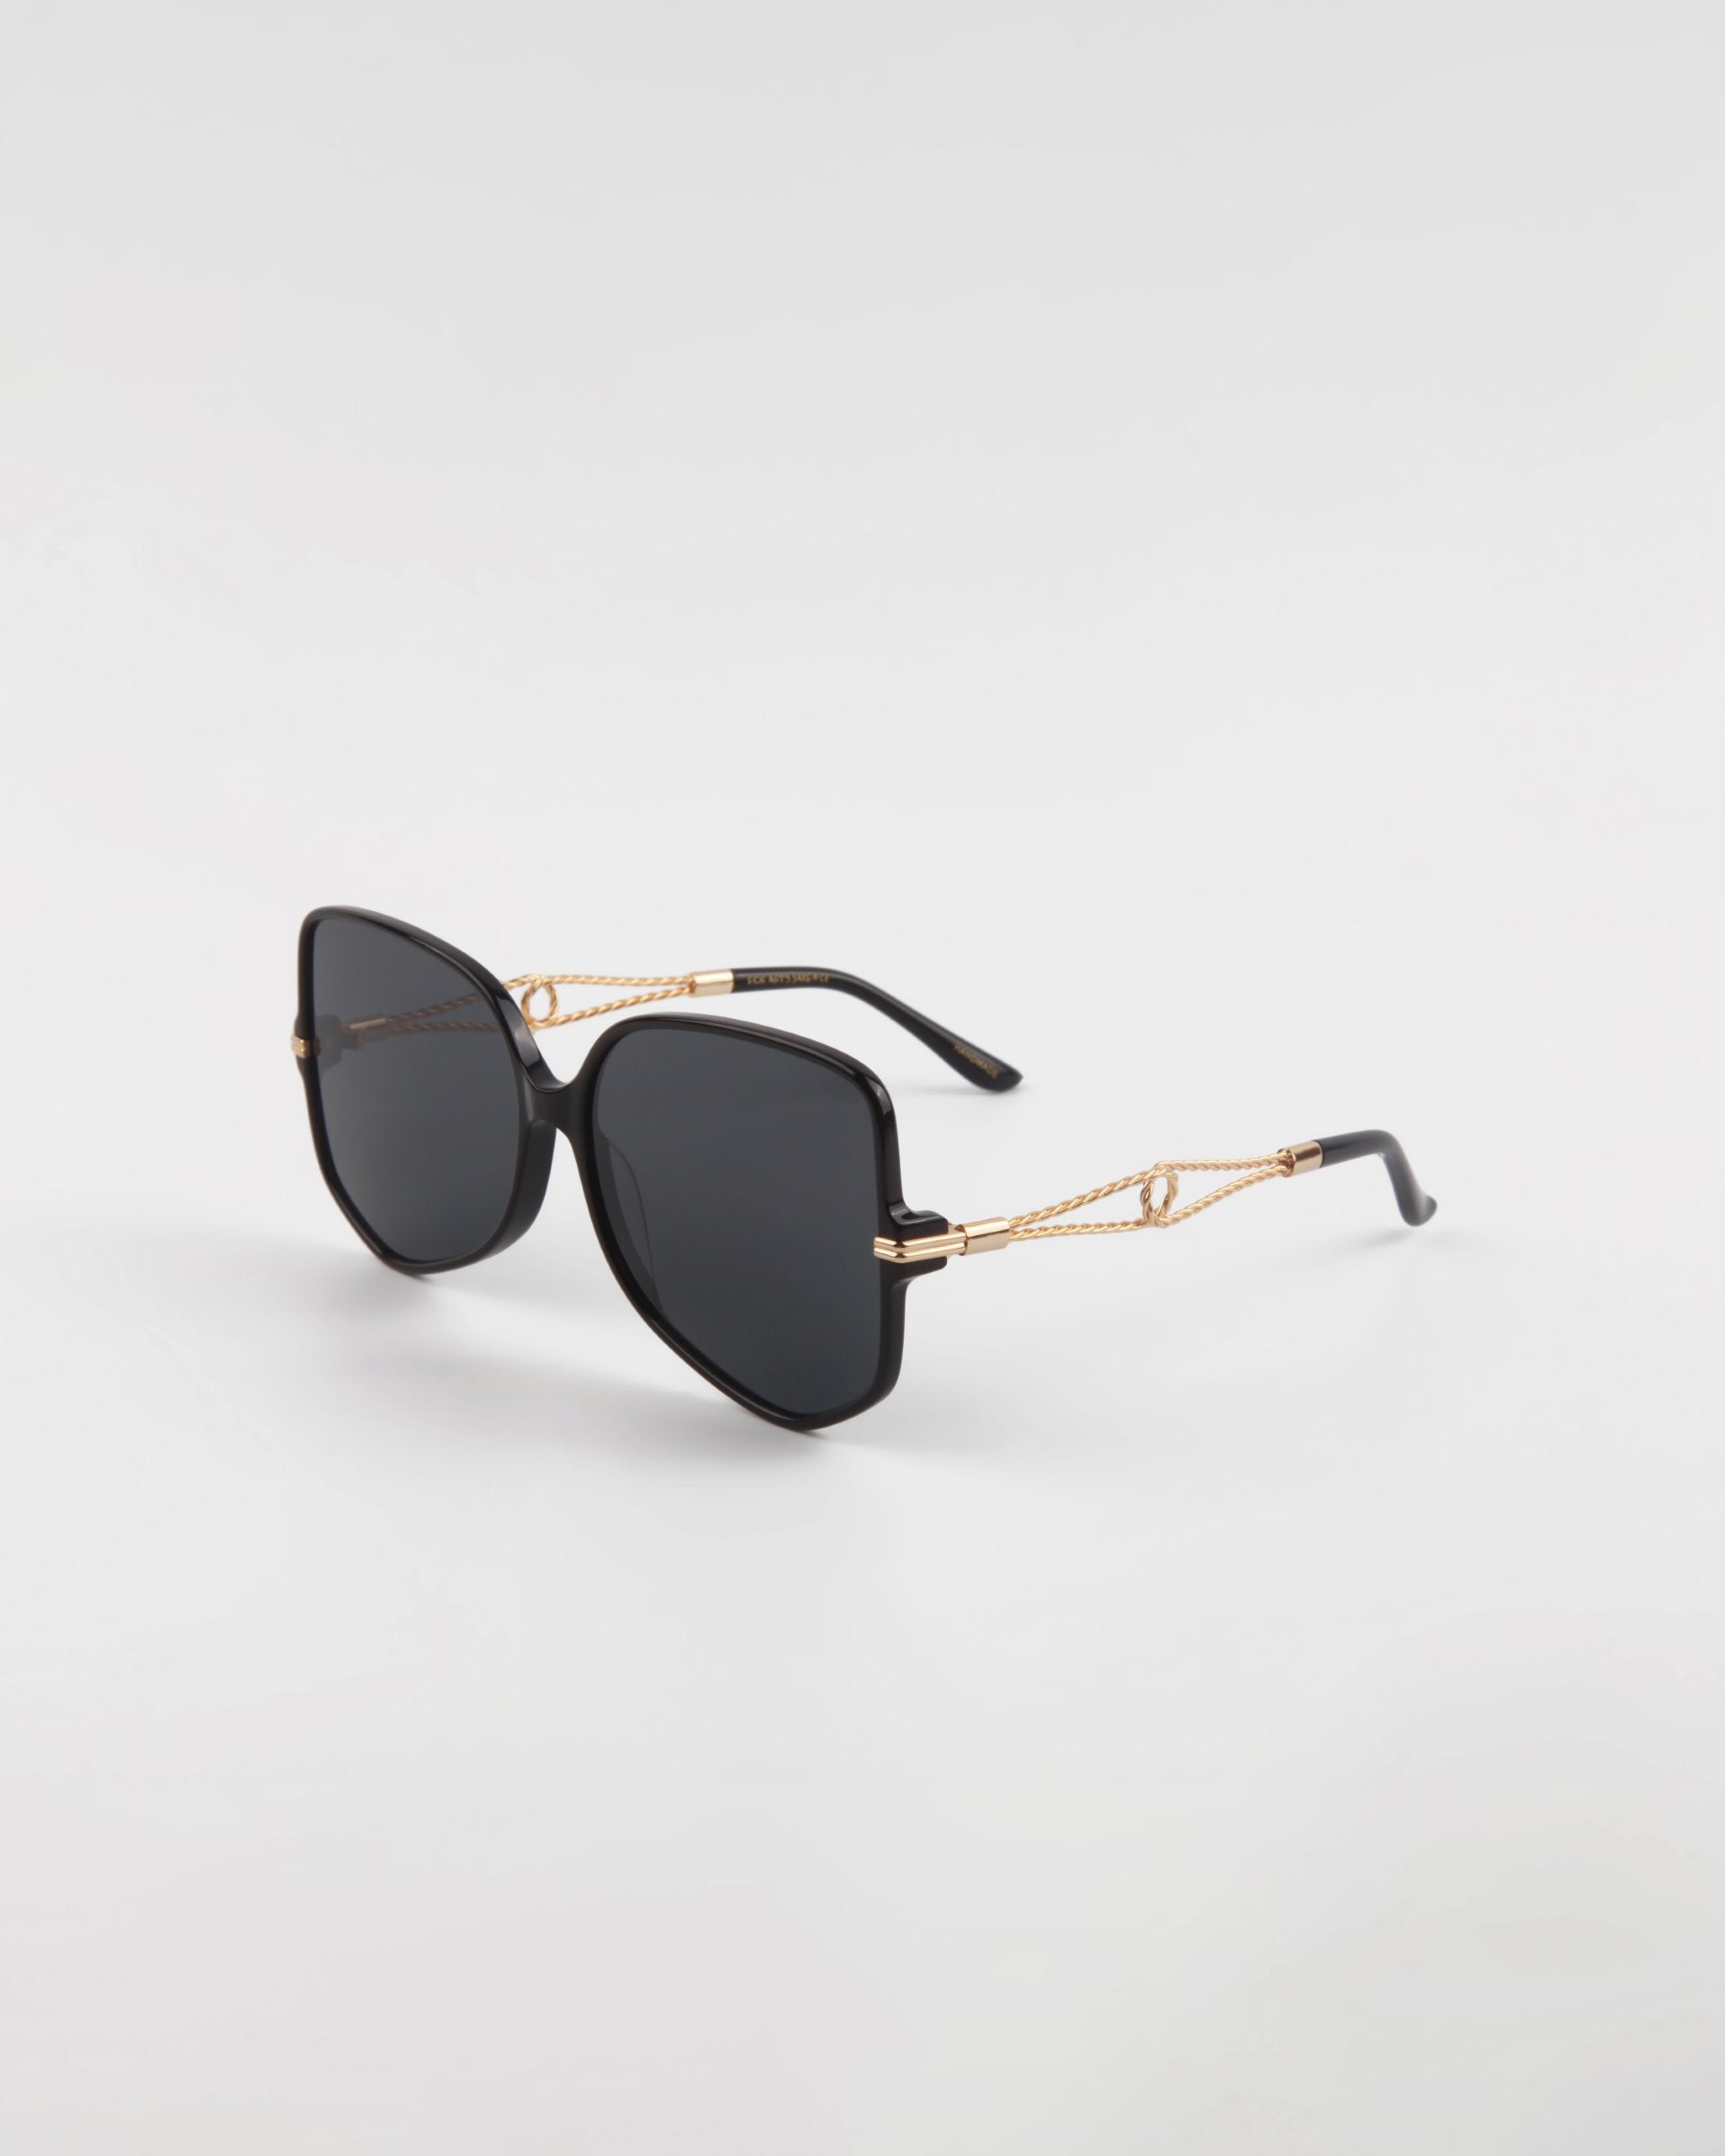 A pair of black Voyager sunglasses from For Art&#39;s Sake® with large, square lenses and gold-tone intricate detailing on the temples are placed against a plain white background. The arms of the Voyager sunglasses, crafted from handmade acetate eyewear, have a slight curve towards the ends.